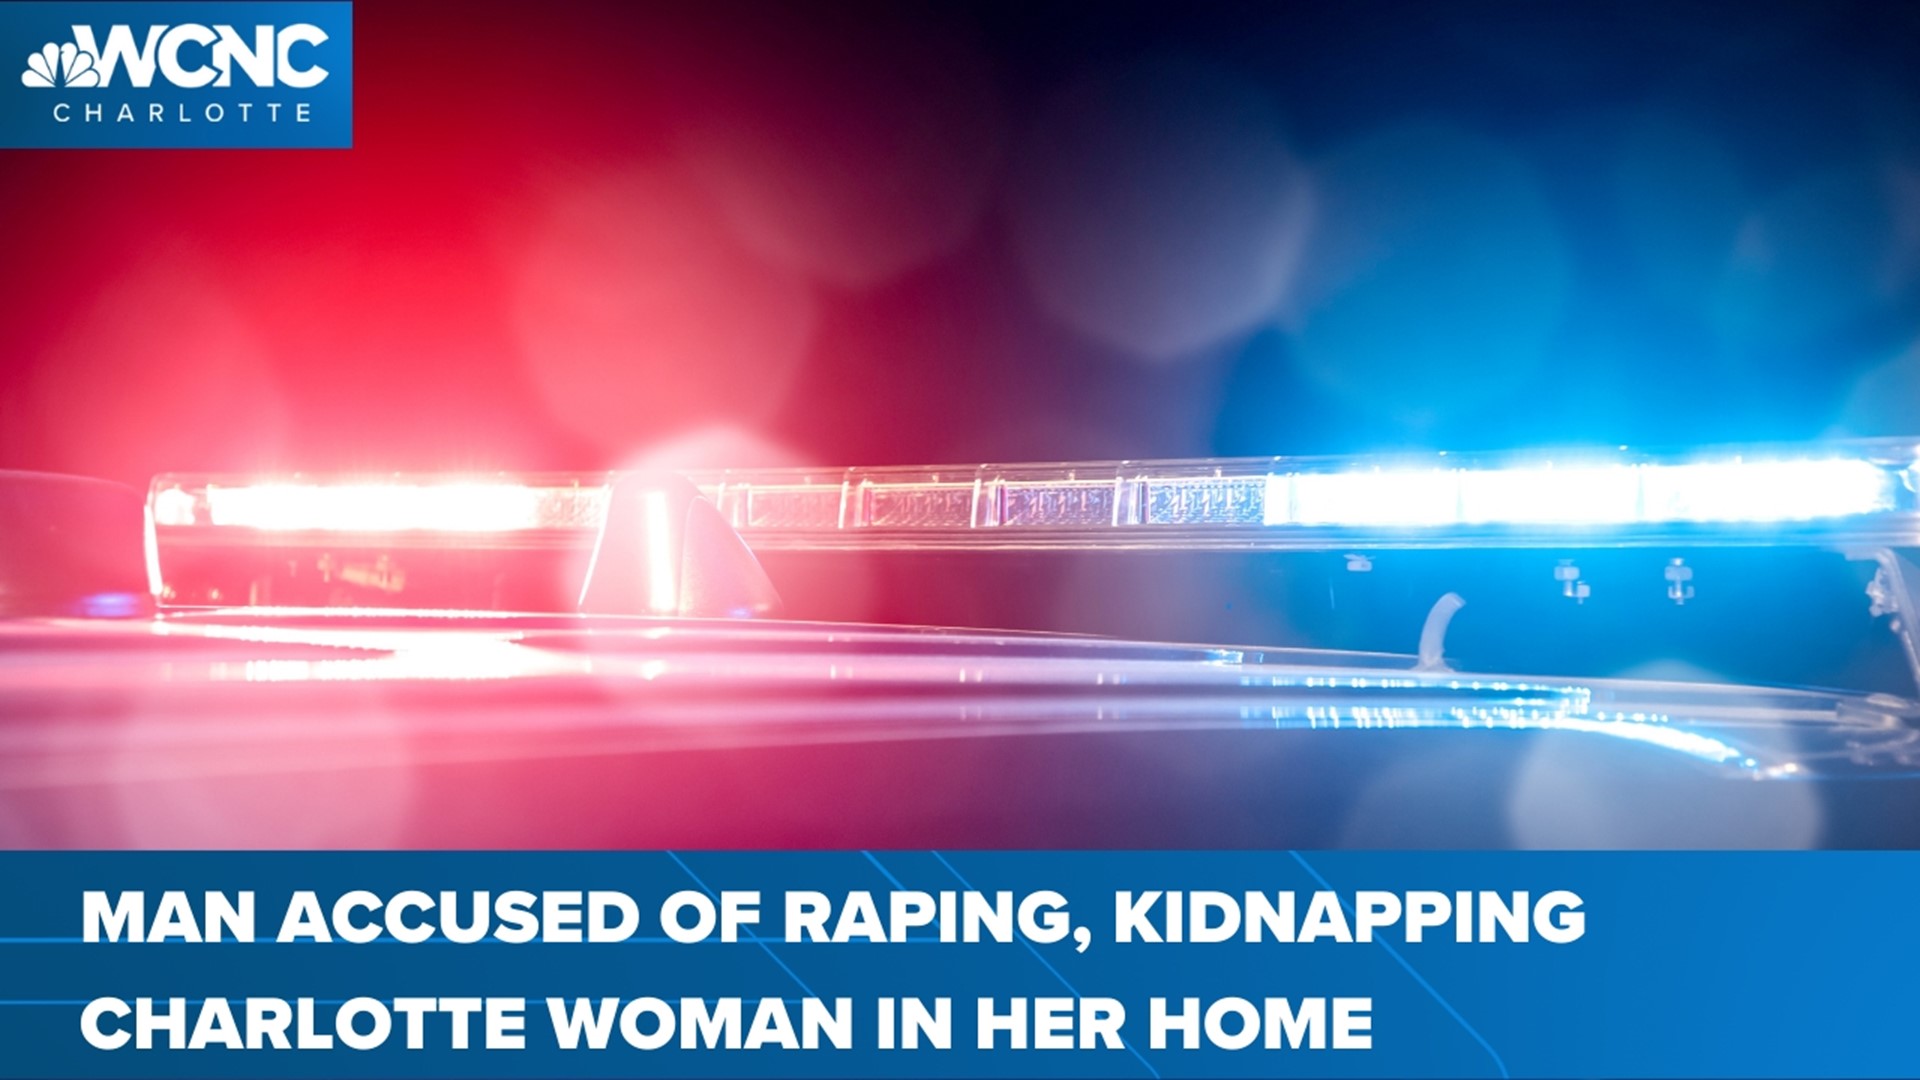 We're getting a clearer picture about what happened before and after a 63-year-old woman was raped and kidnapped.